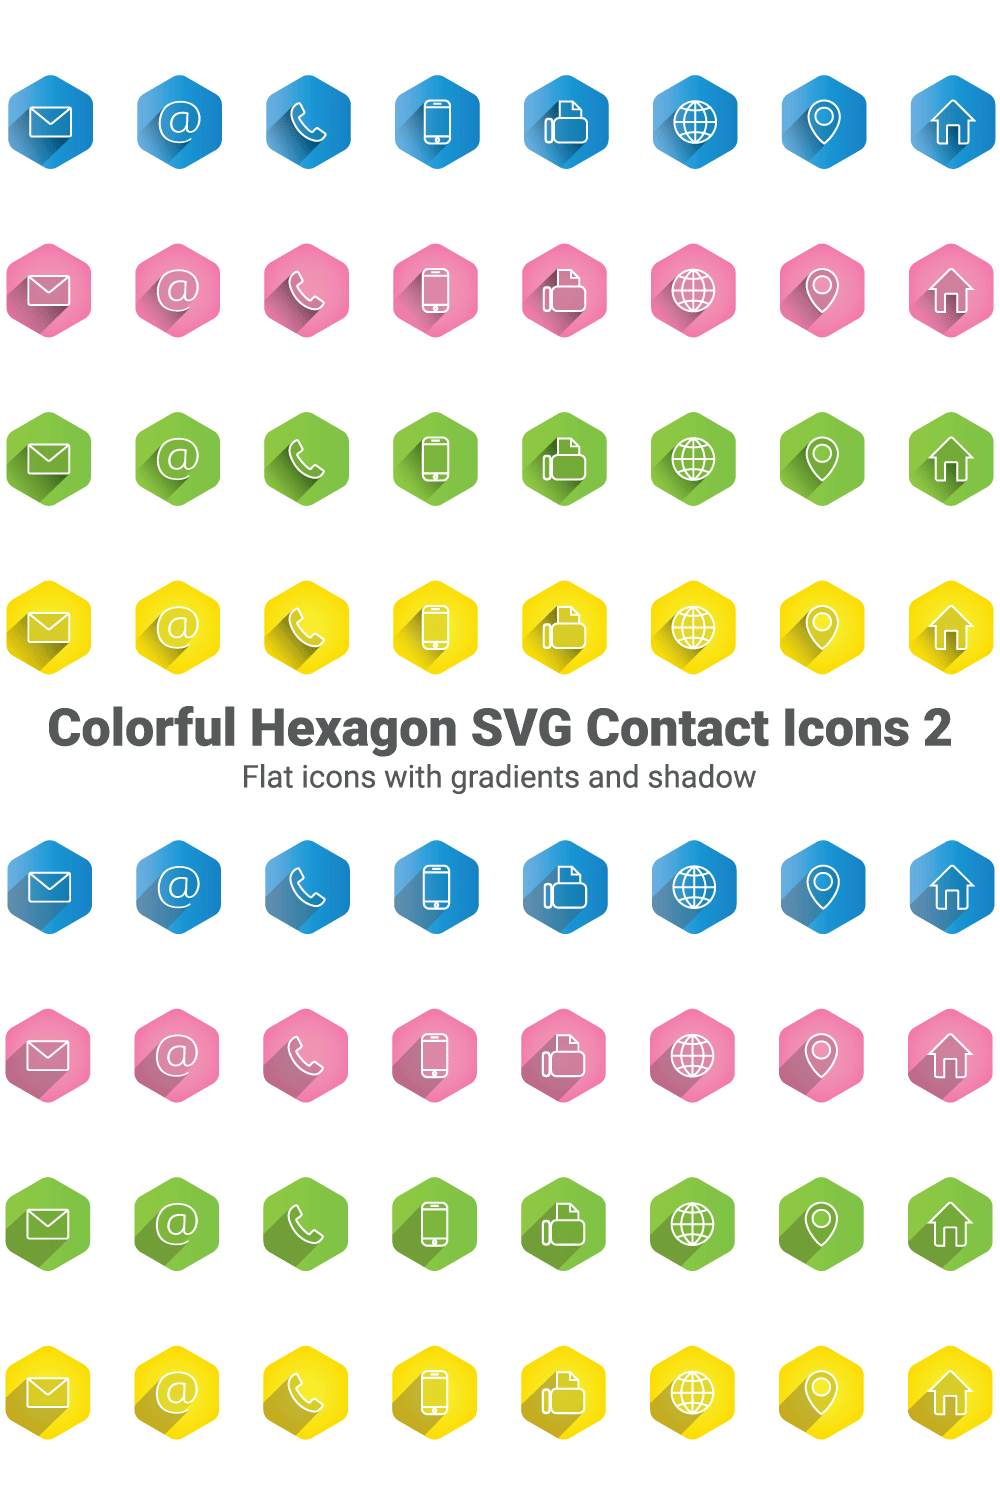 Colorful hexagon SVG contact icons 2 pinterest preview image.